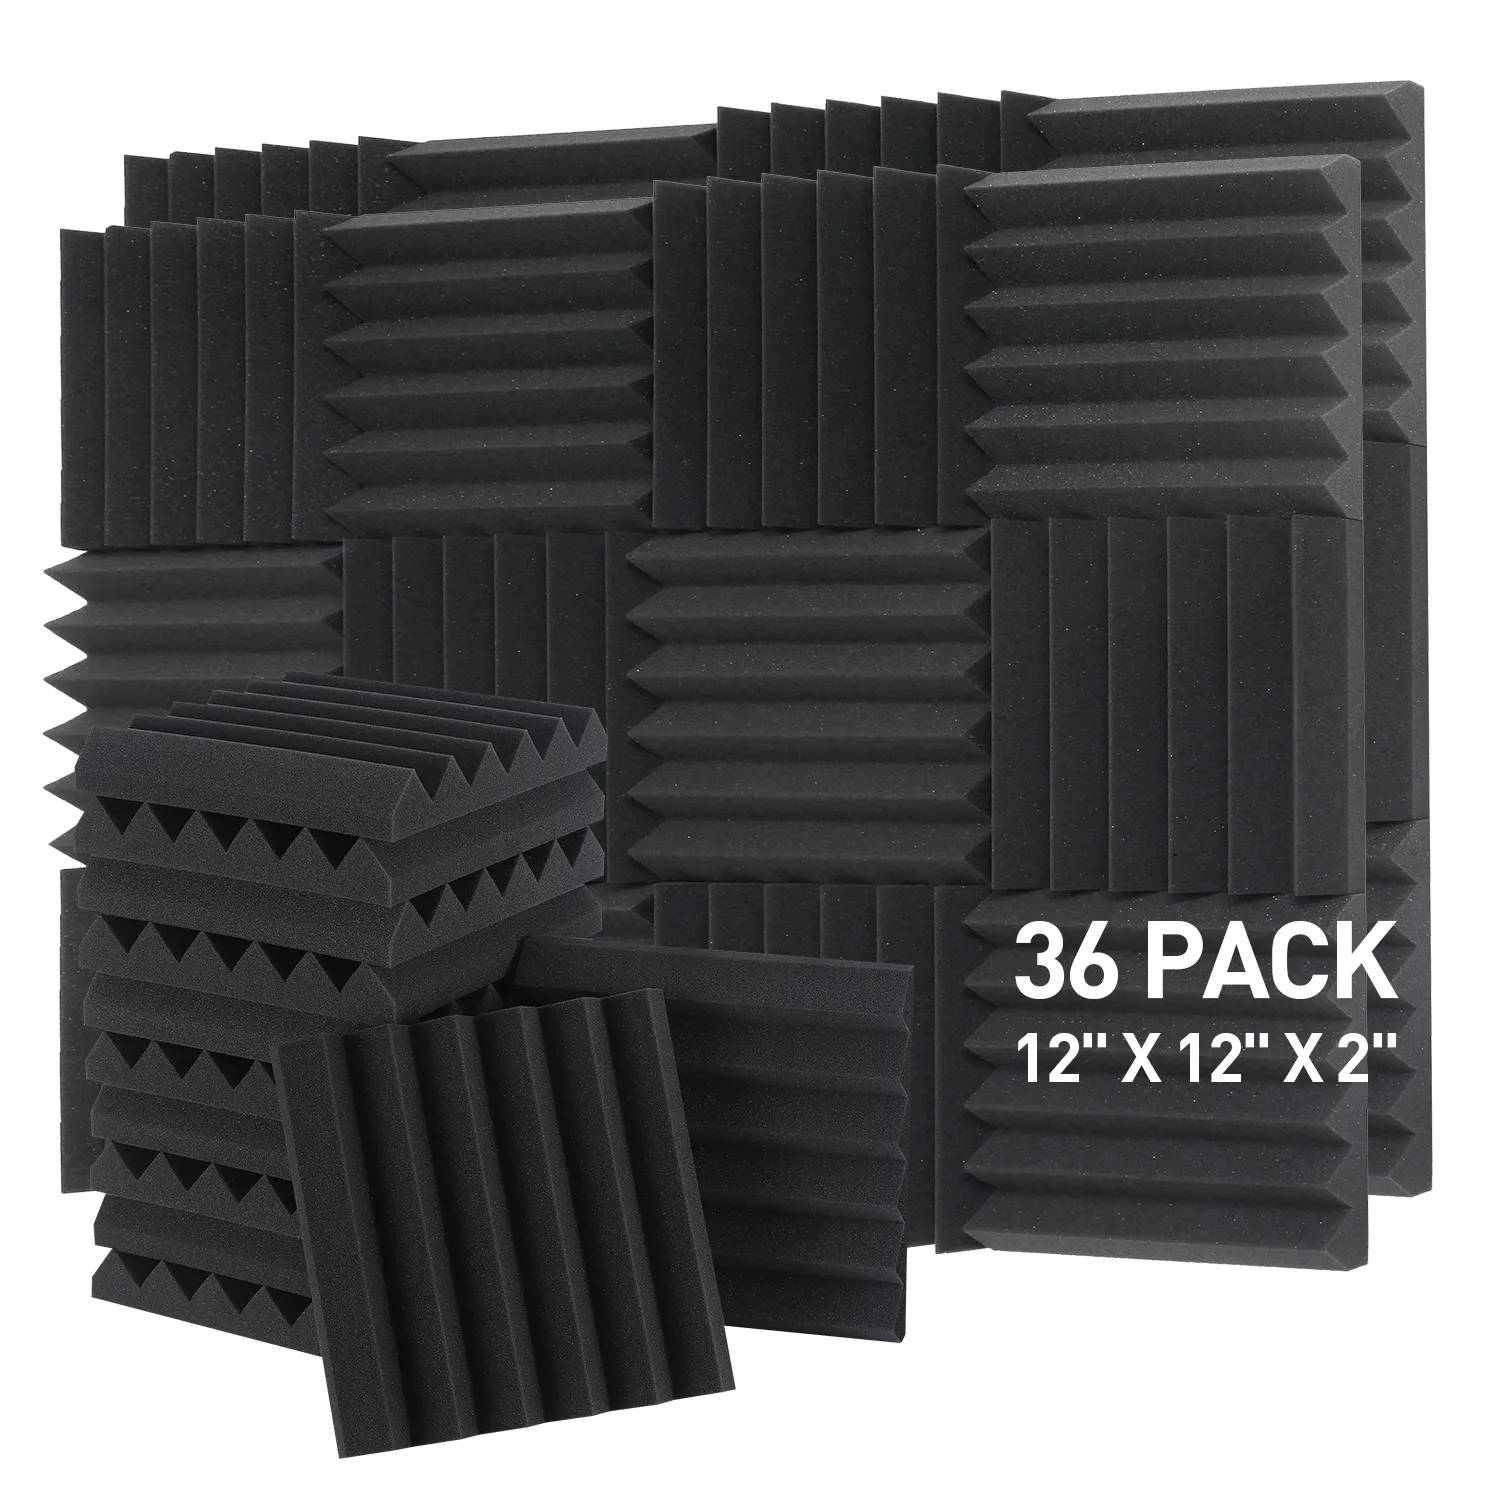 Wedges Acoustic Foam Panels Sound Proofing Padding for Walls and Ceiling High Density Foam Studio Foam